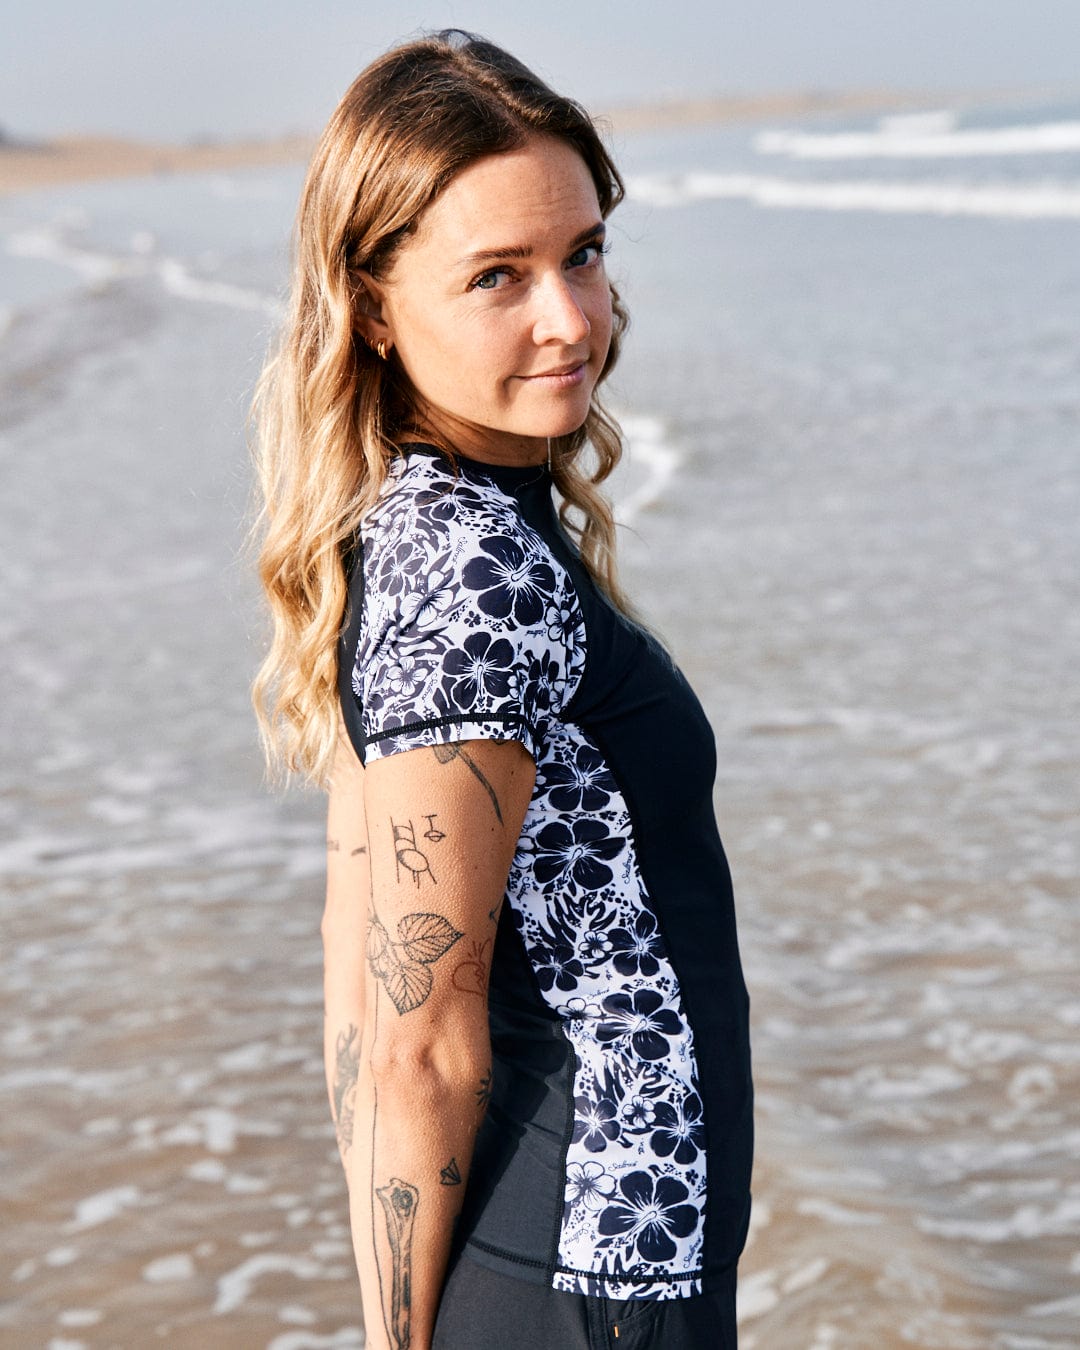 Woman with tattoos wearing a Hibiscus - Recycled Womens Short Sleeve Rashvest - Black by Saltrock, featuring UPF 50 protection, standing on a beach with waves in the background.